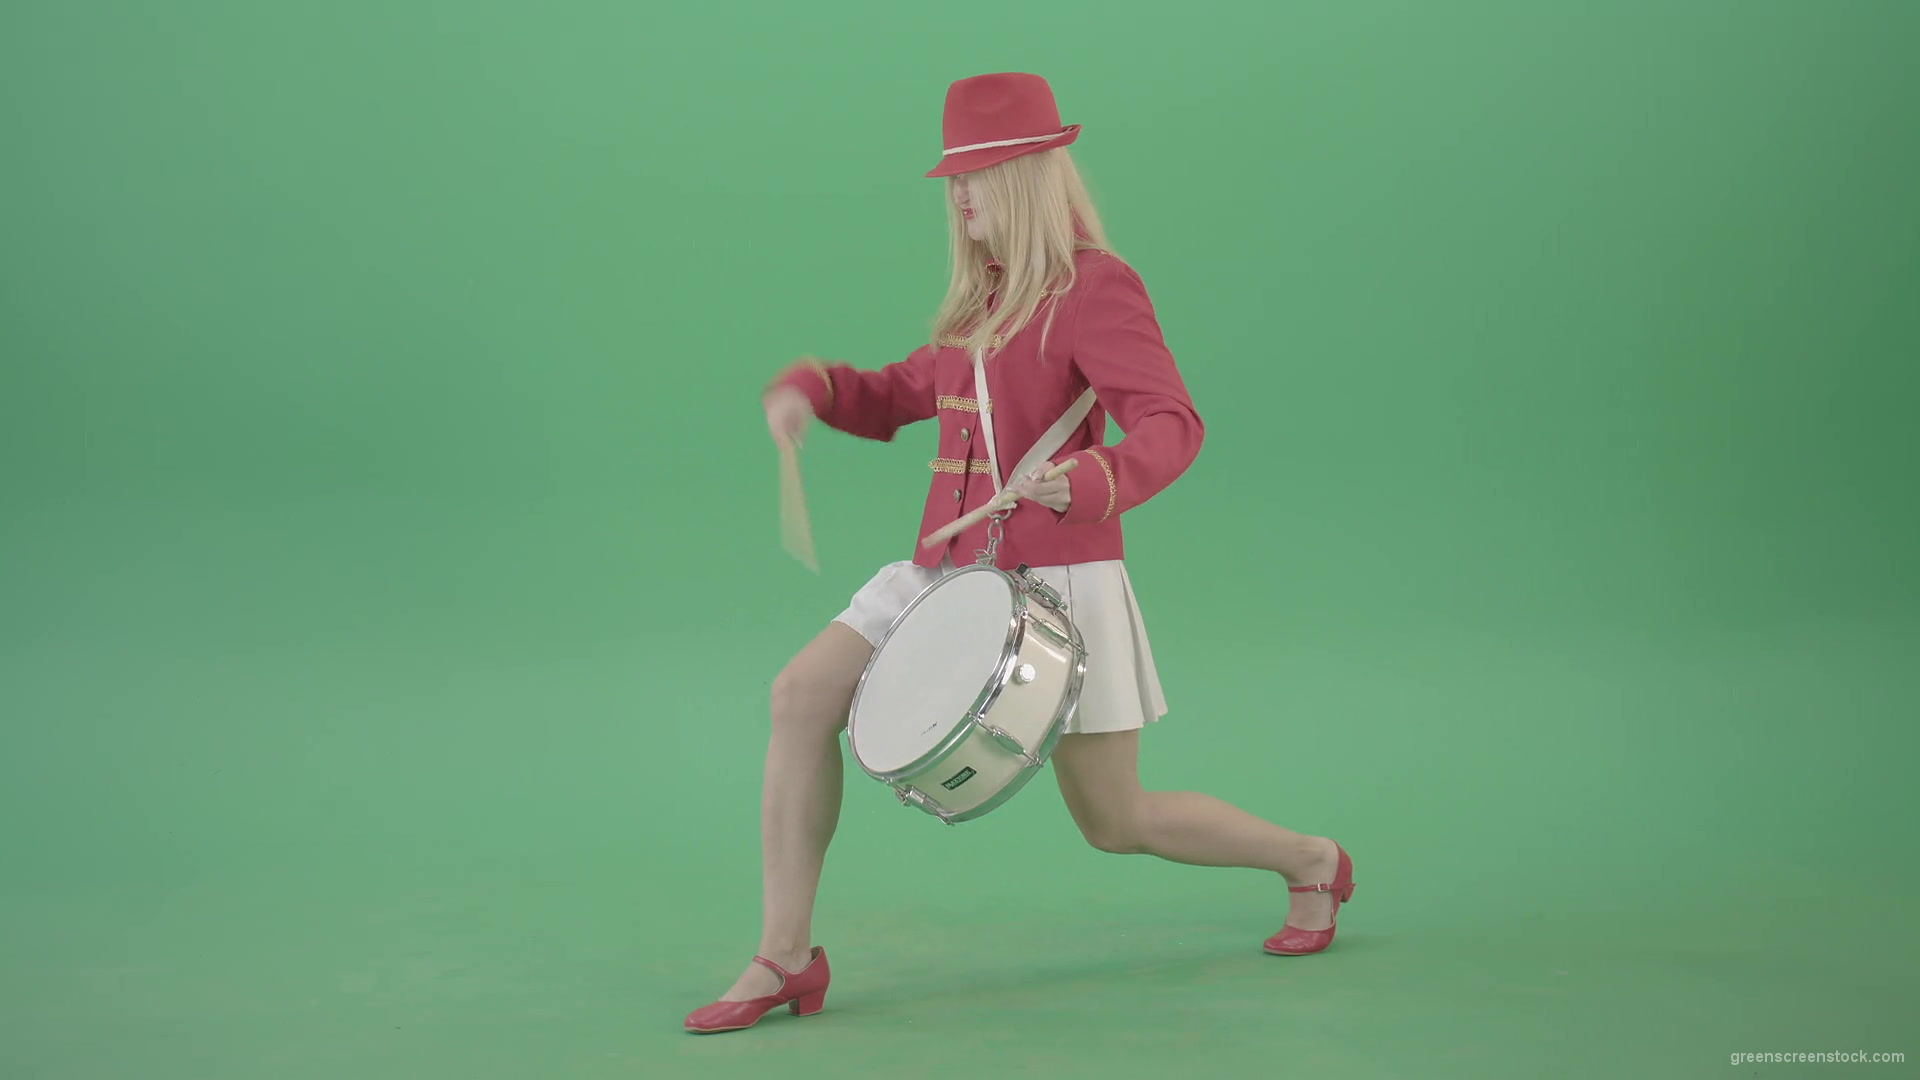 Blondie-is-ready-for-adventure-making-beats-on-snare-drum-isolated-on-Green-Screen-4K-Video-Footage-1920_004 Green Screen Stock